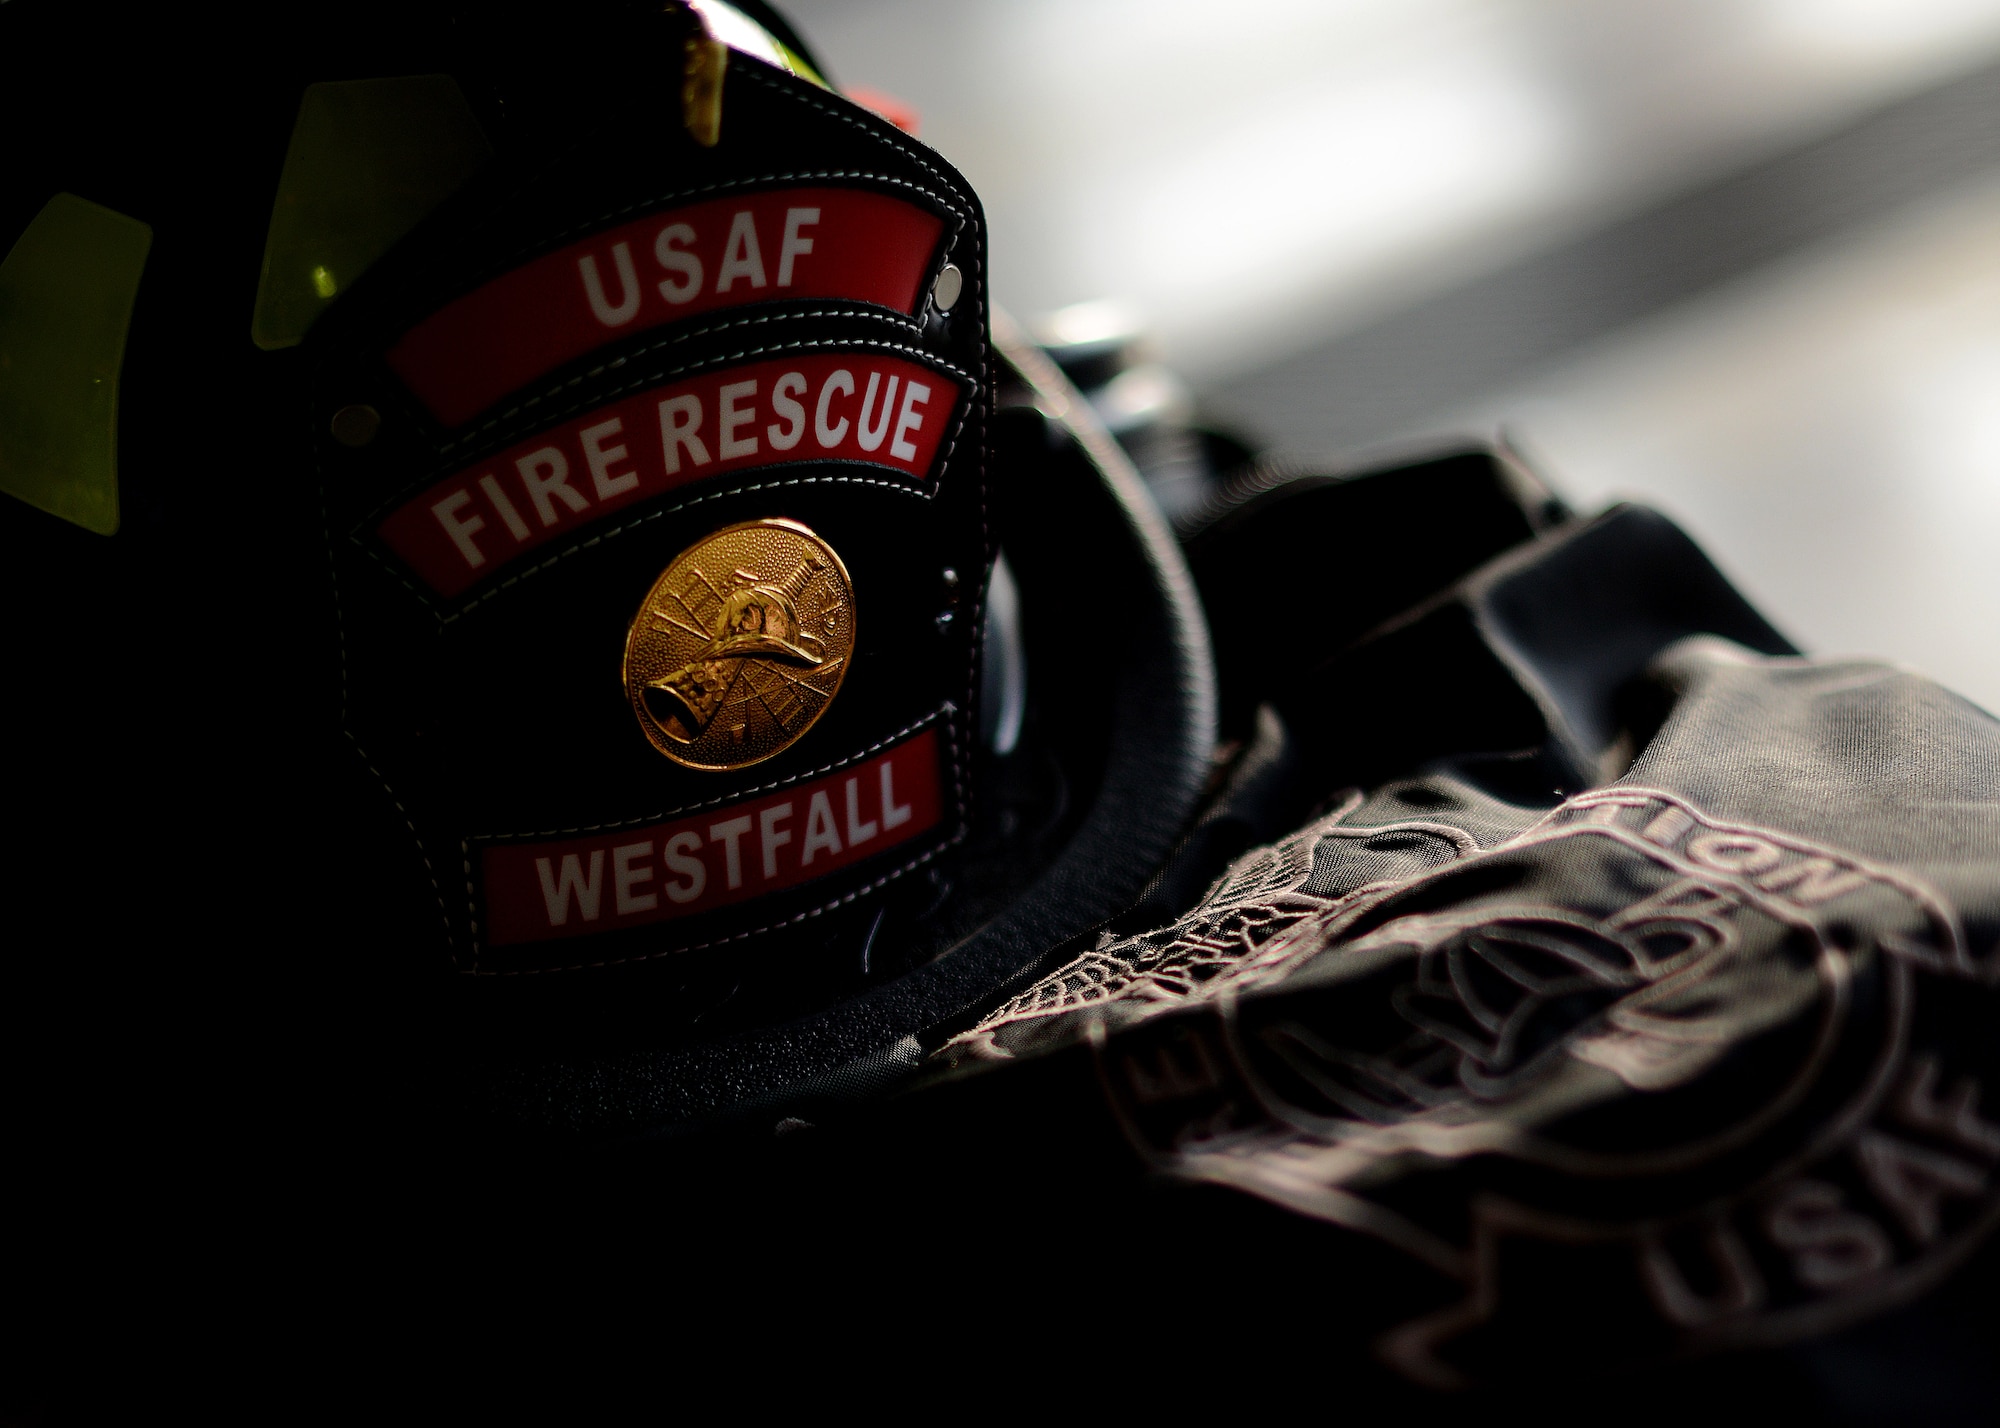 A firefighter’s helmet rests on the ground Sept. 11, 2015, at Aviano Air Base, Italy. A remembrance ceremony was held to commemorate the 11th anniversary of the Sept. 11, 2001 terrorist attacks that claimed the lives of approximately 3,000 innocent people at the World Trade Center, Shanksville, Penn., and the Pentagon. (U.S. Air Force photo/Staff Sgt. Evelyn Chavez)